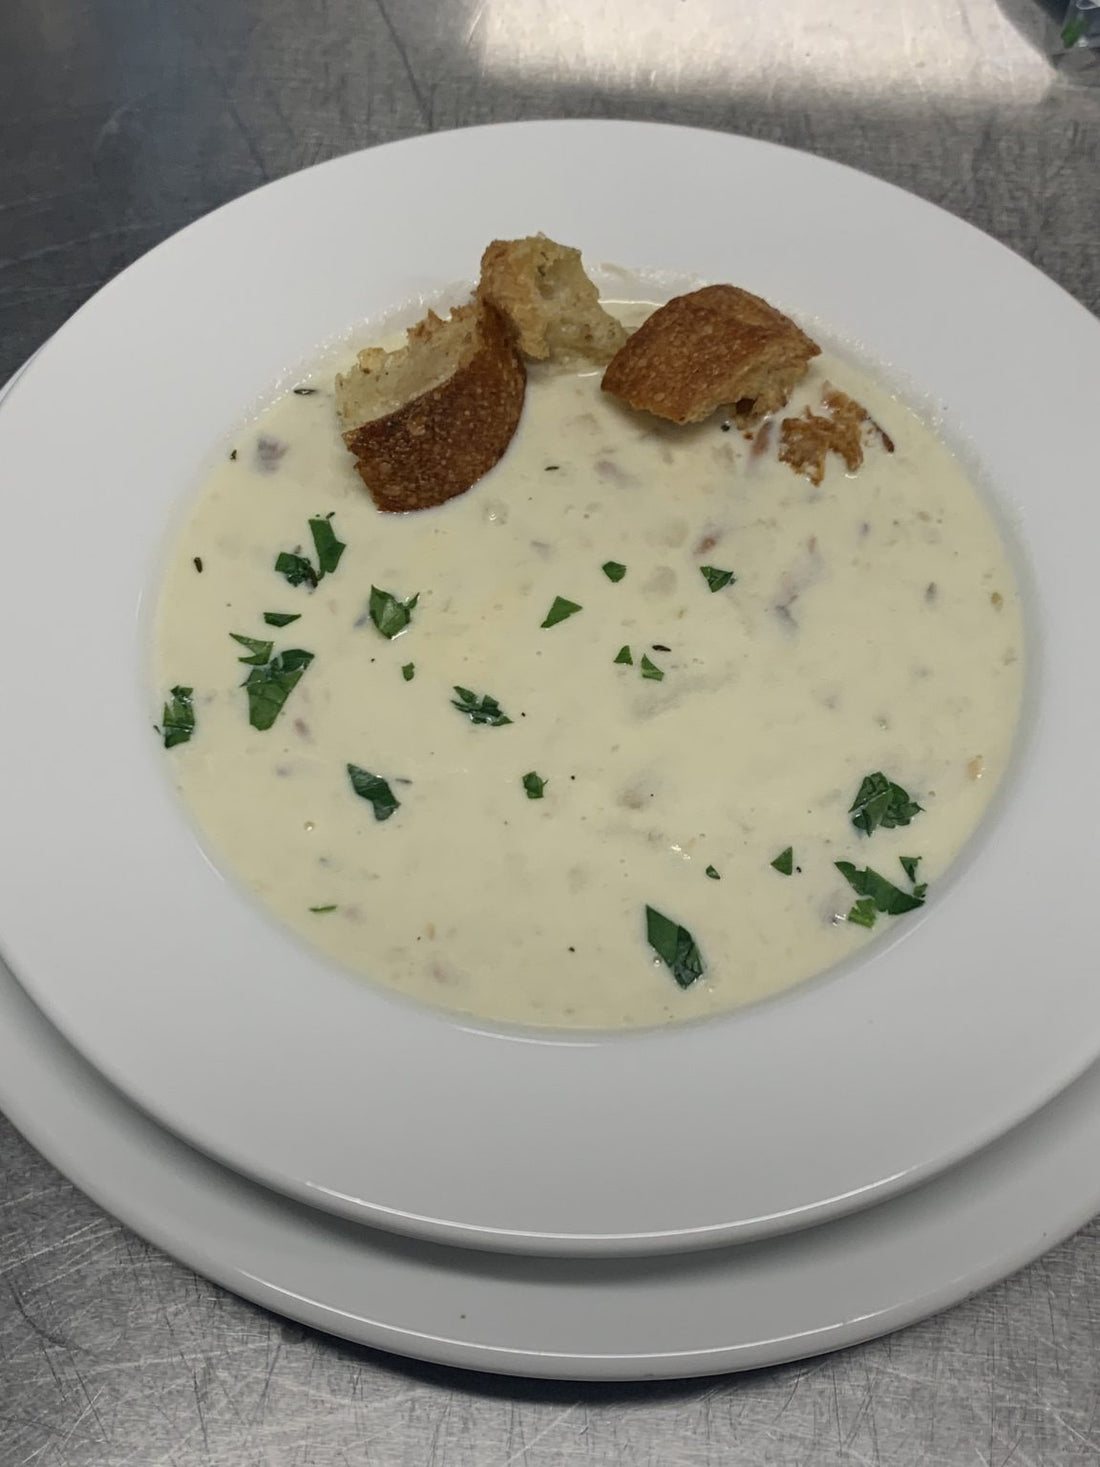 Cullen Skink: Scottish Smoked Haddock Chowder, by Cecily Gans, The Main Course Catering and FSC Chef